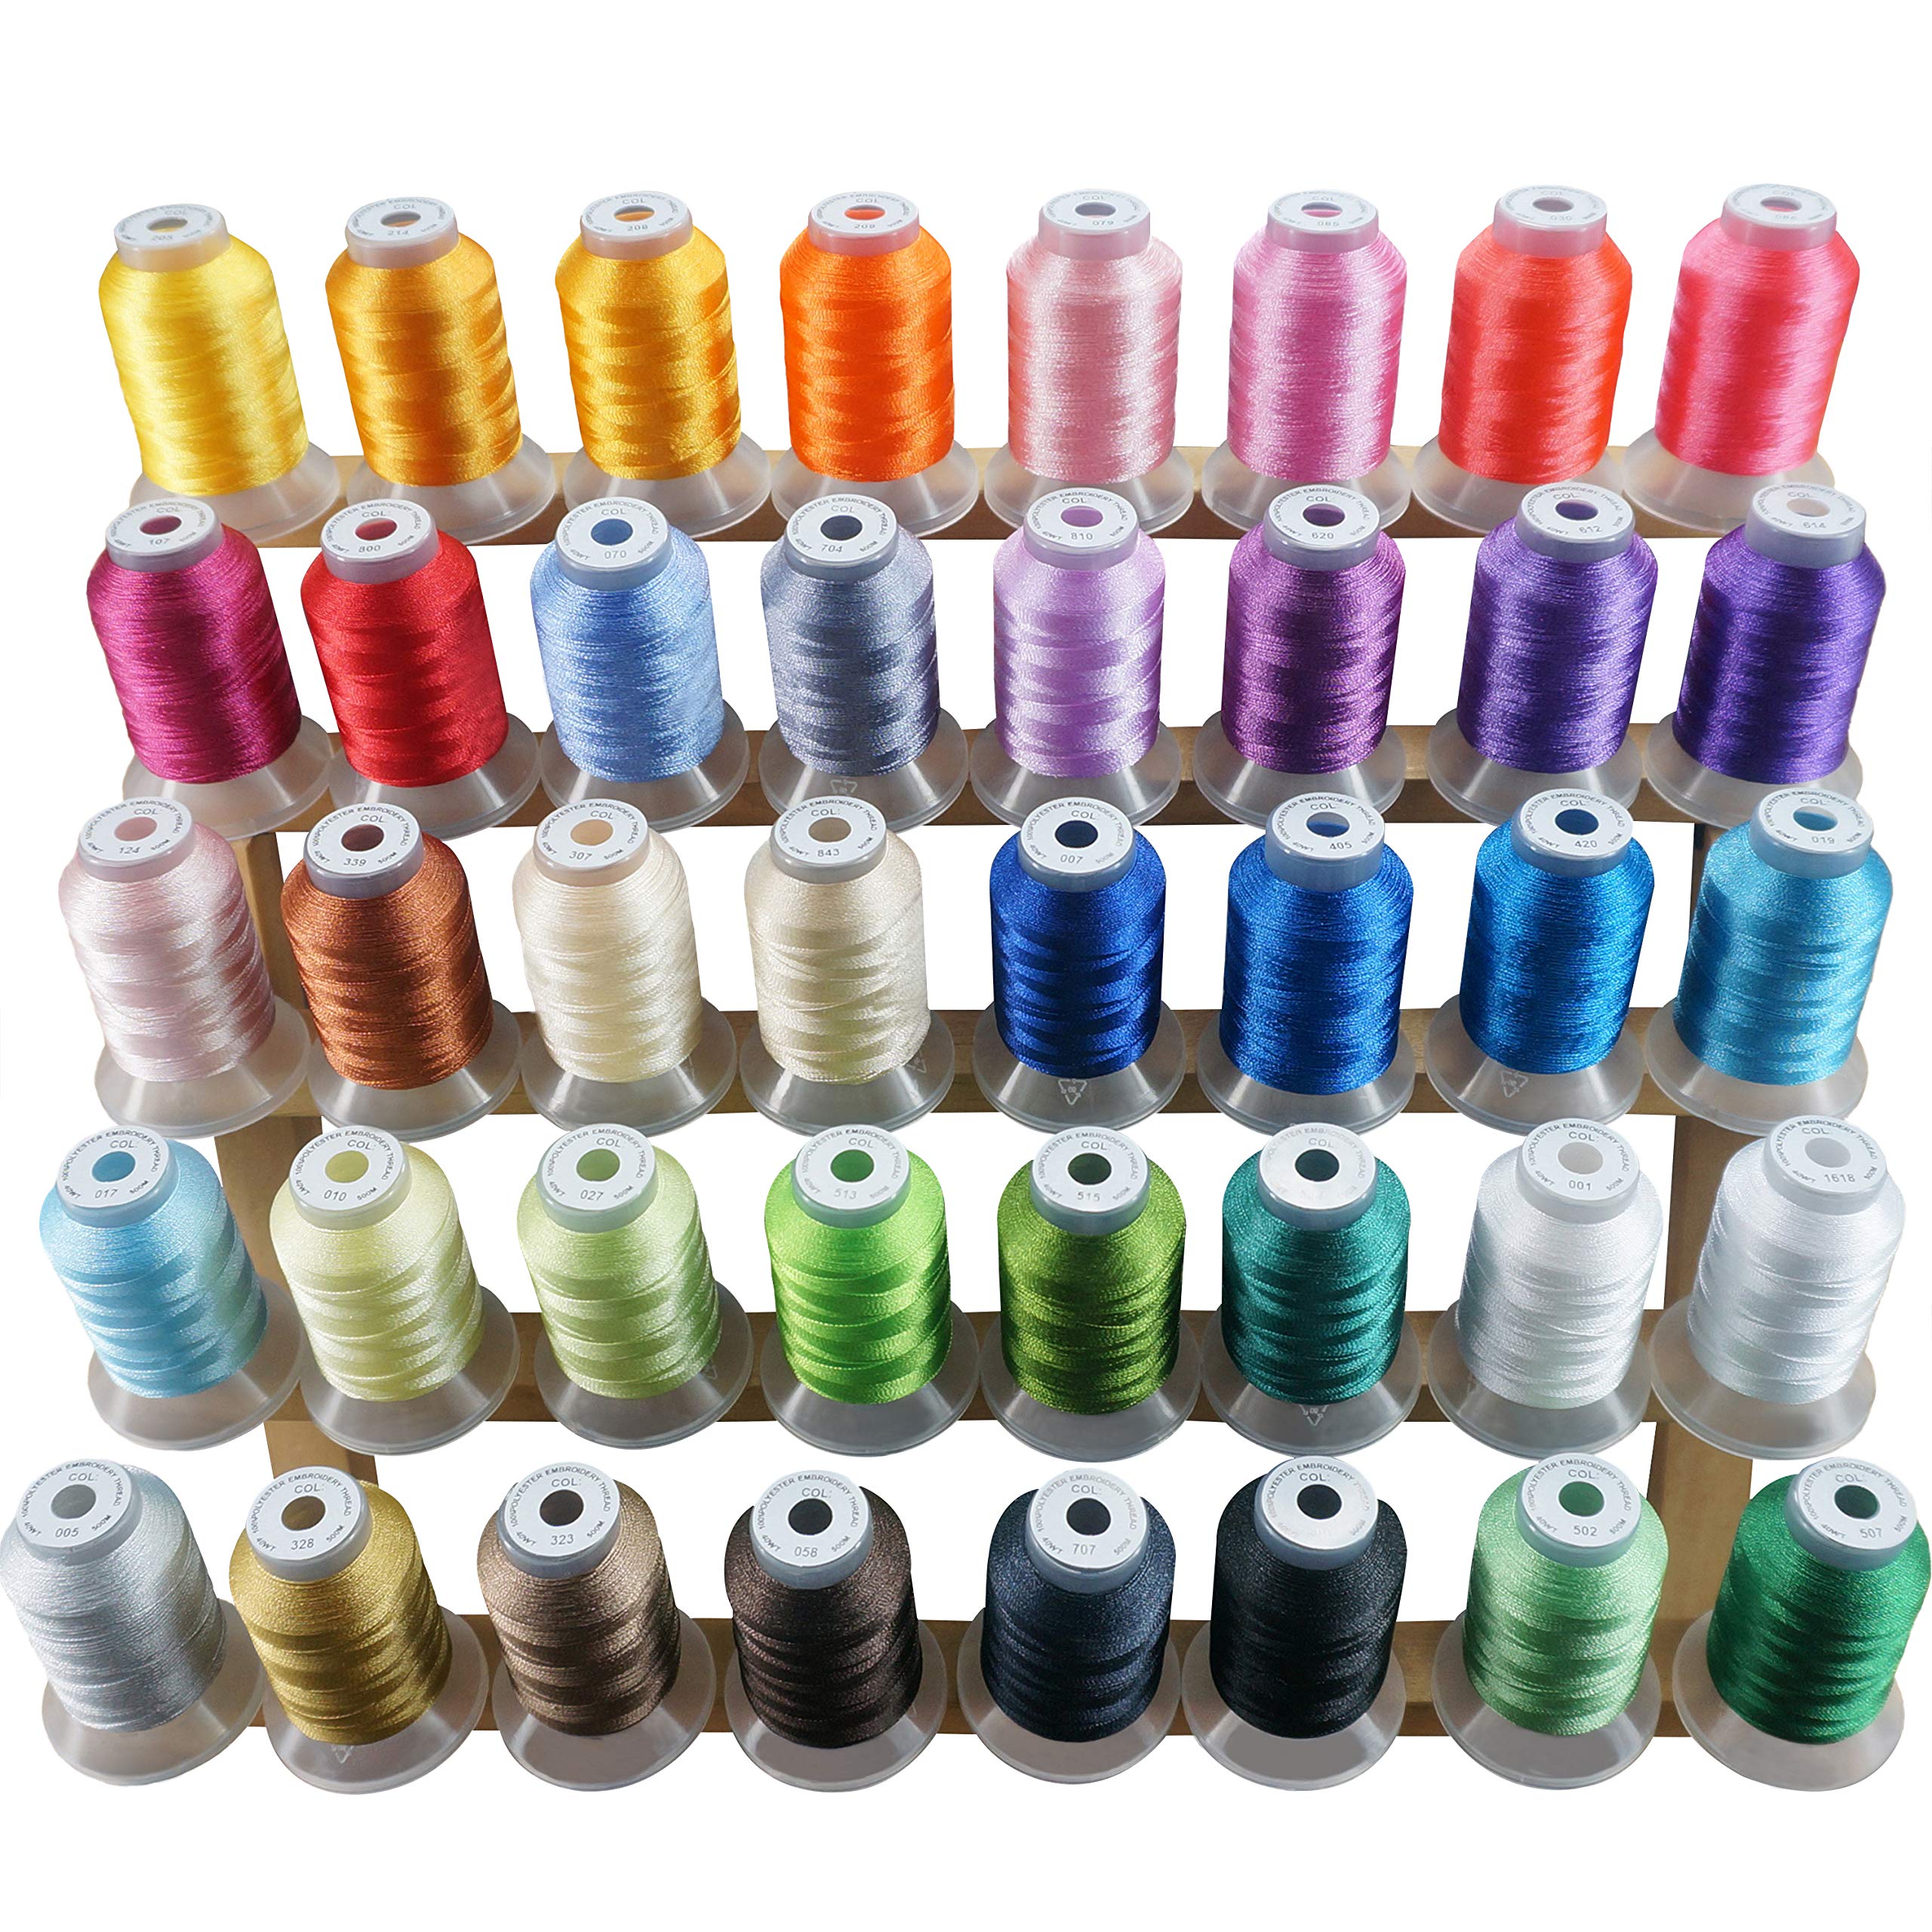  New brothread 40 Brother Colors 500m Each Embroidery Machine  Thread with Clear Plastic Storage Box for Embroidery Sewing Machine : Arts,  Crafts & Sewing